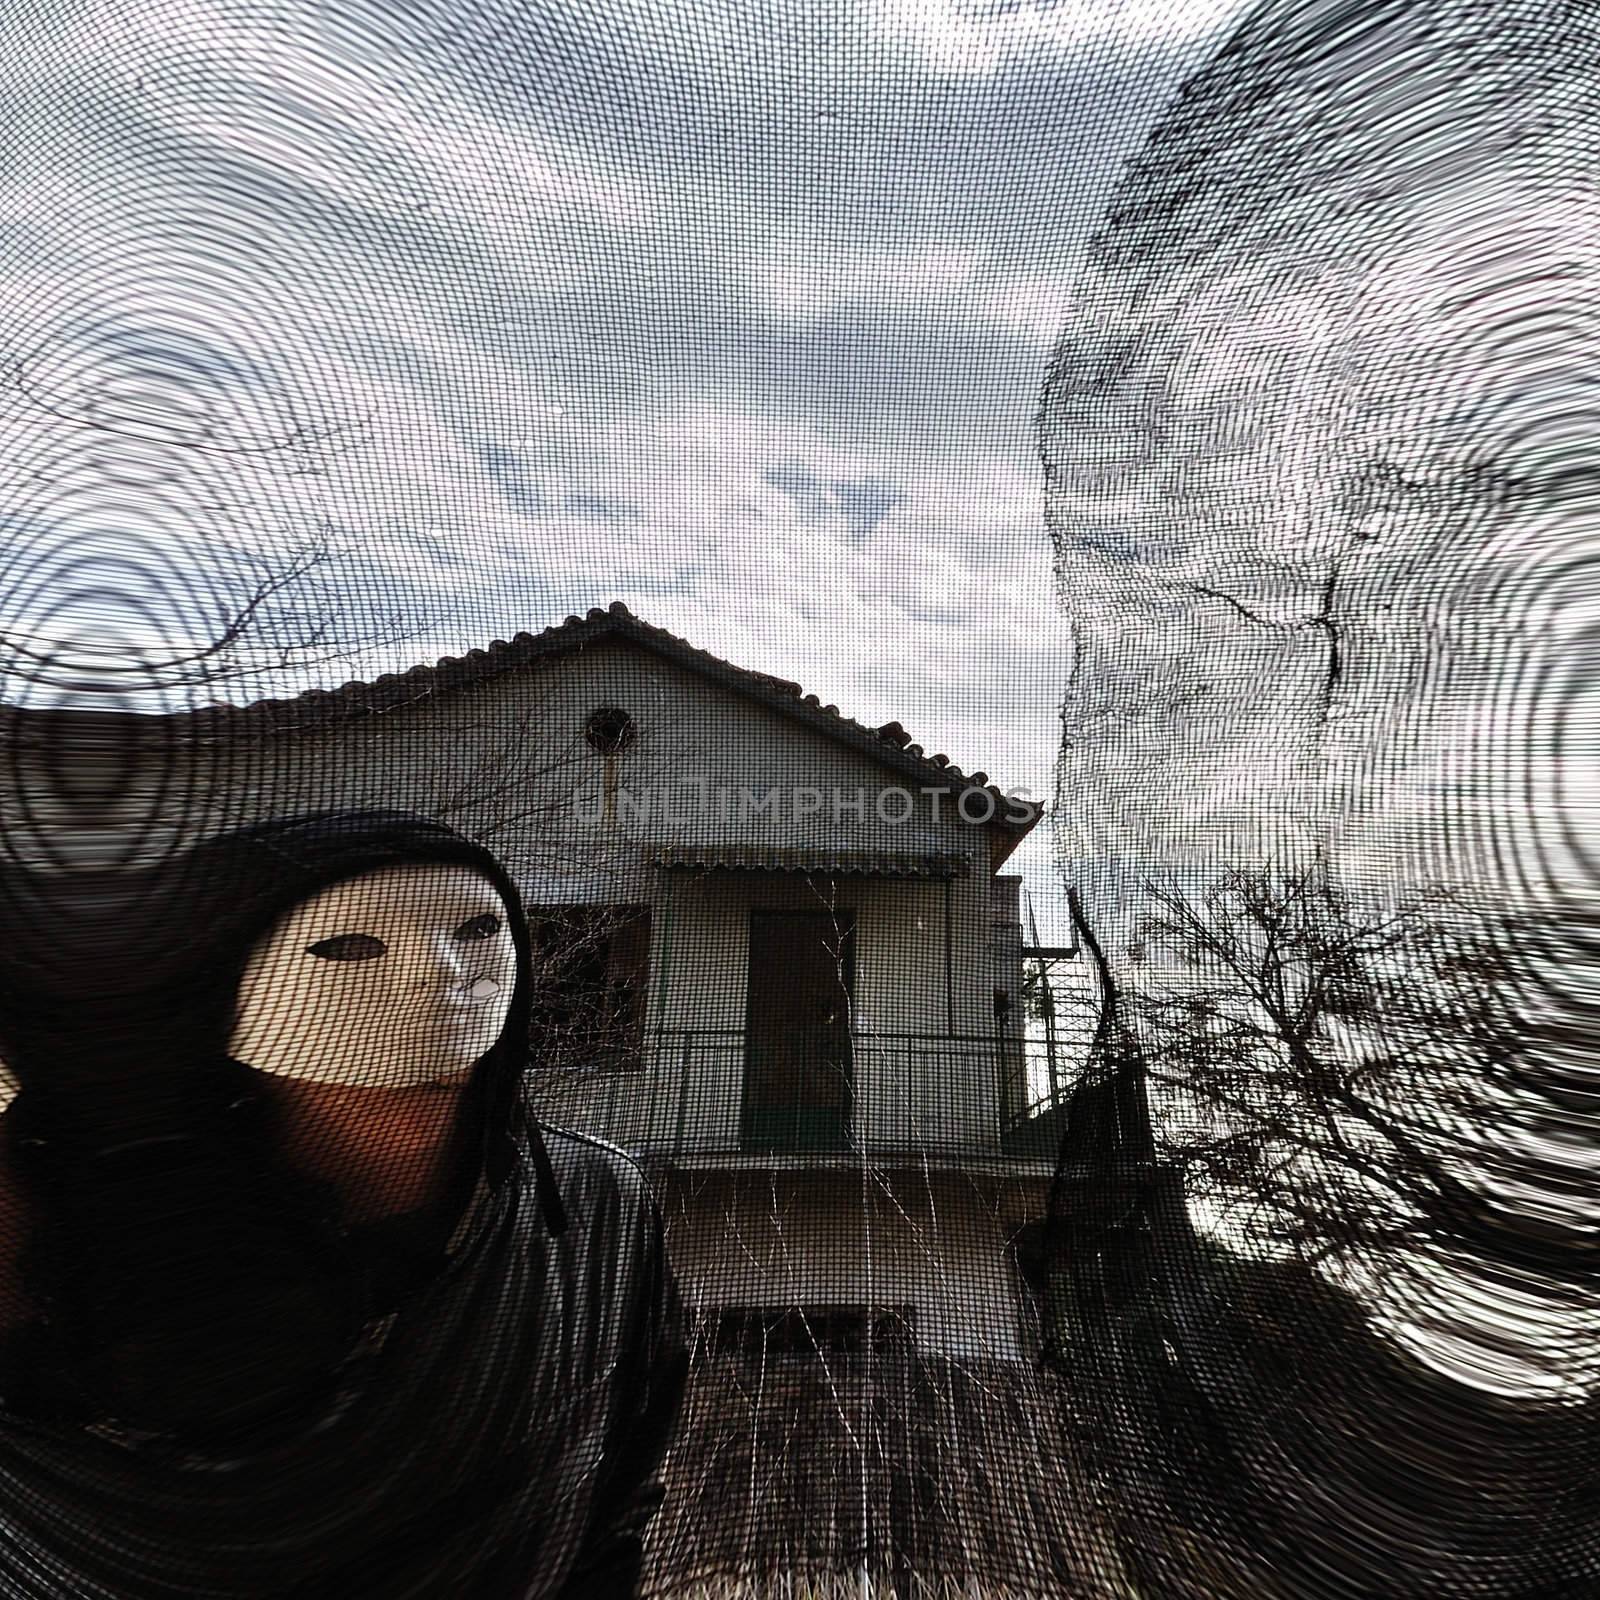 Dilapidated house and masked evil figure behind distorted threaded window.